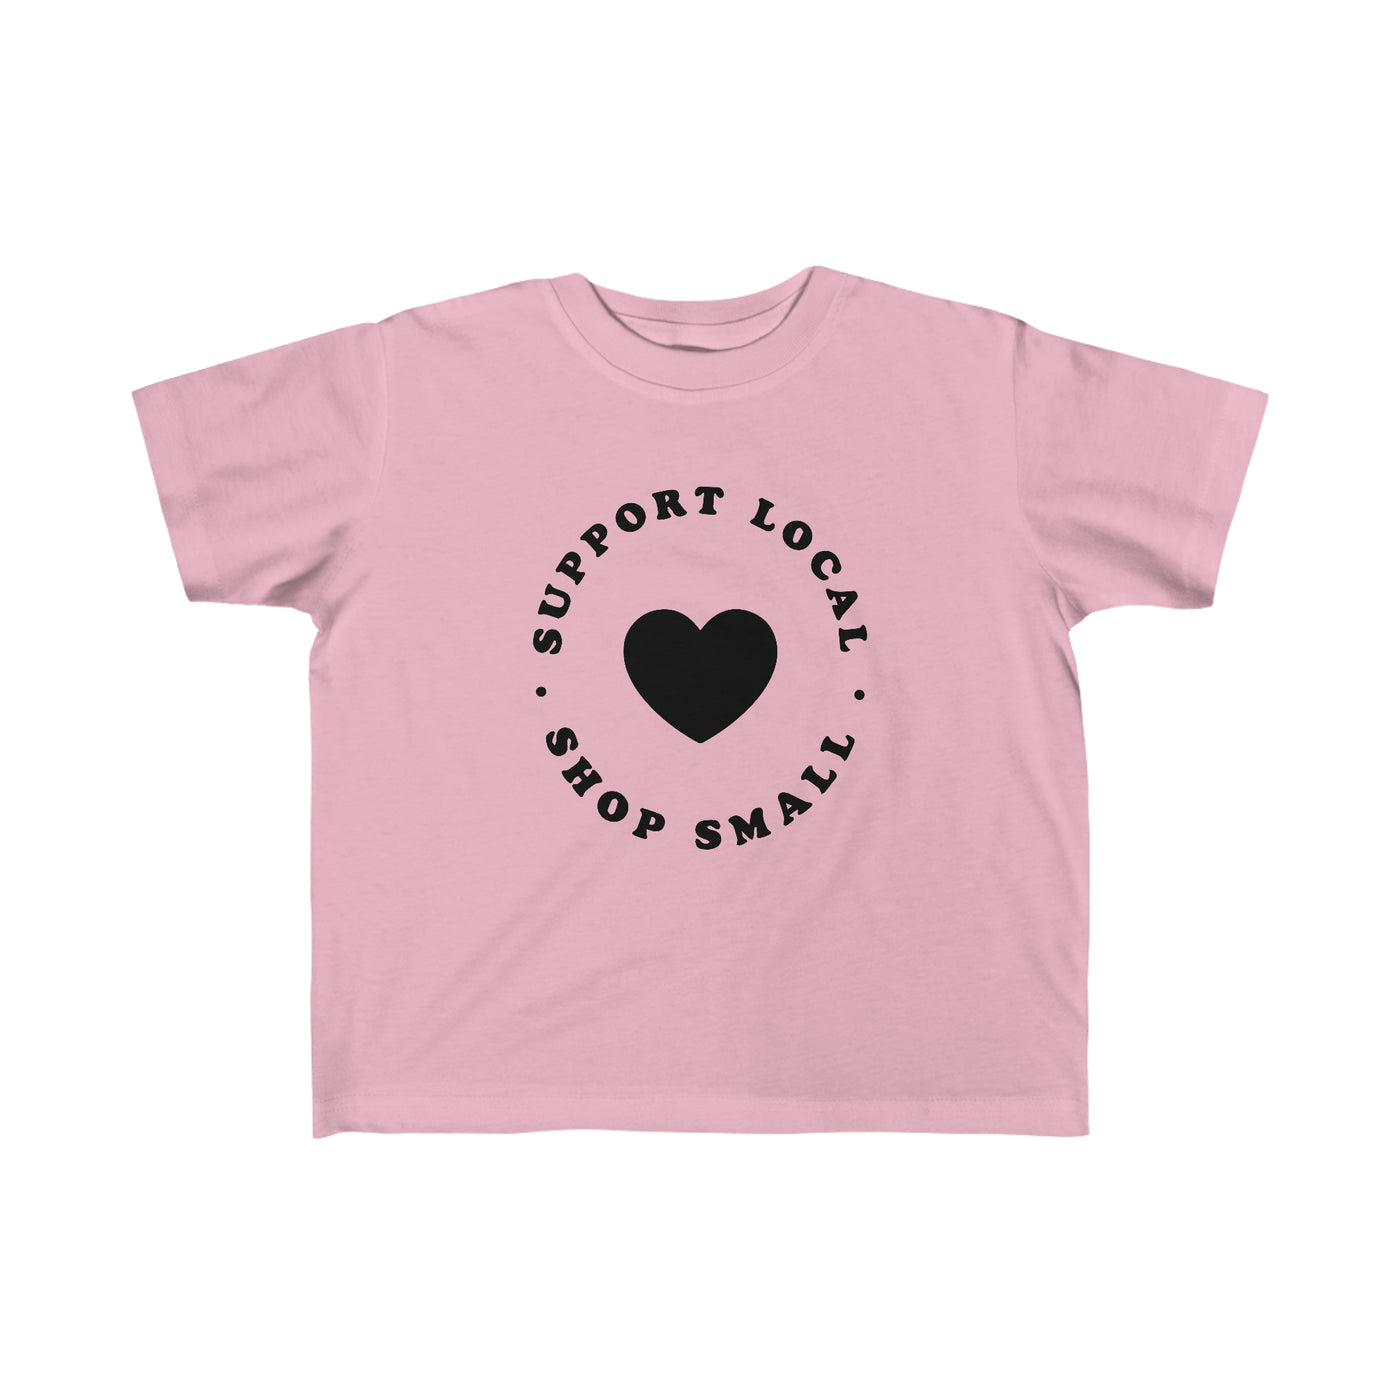 Support Local Shop Small Toddler Tee